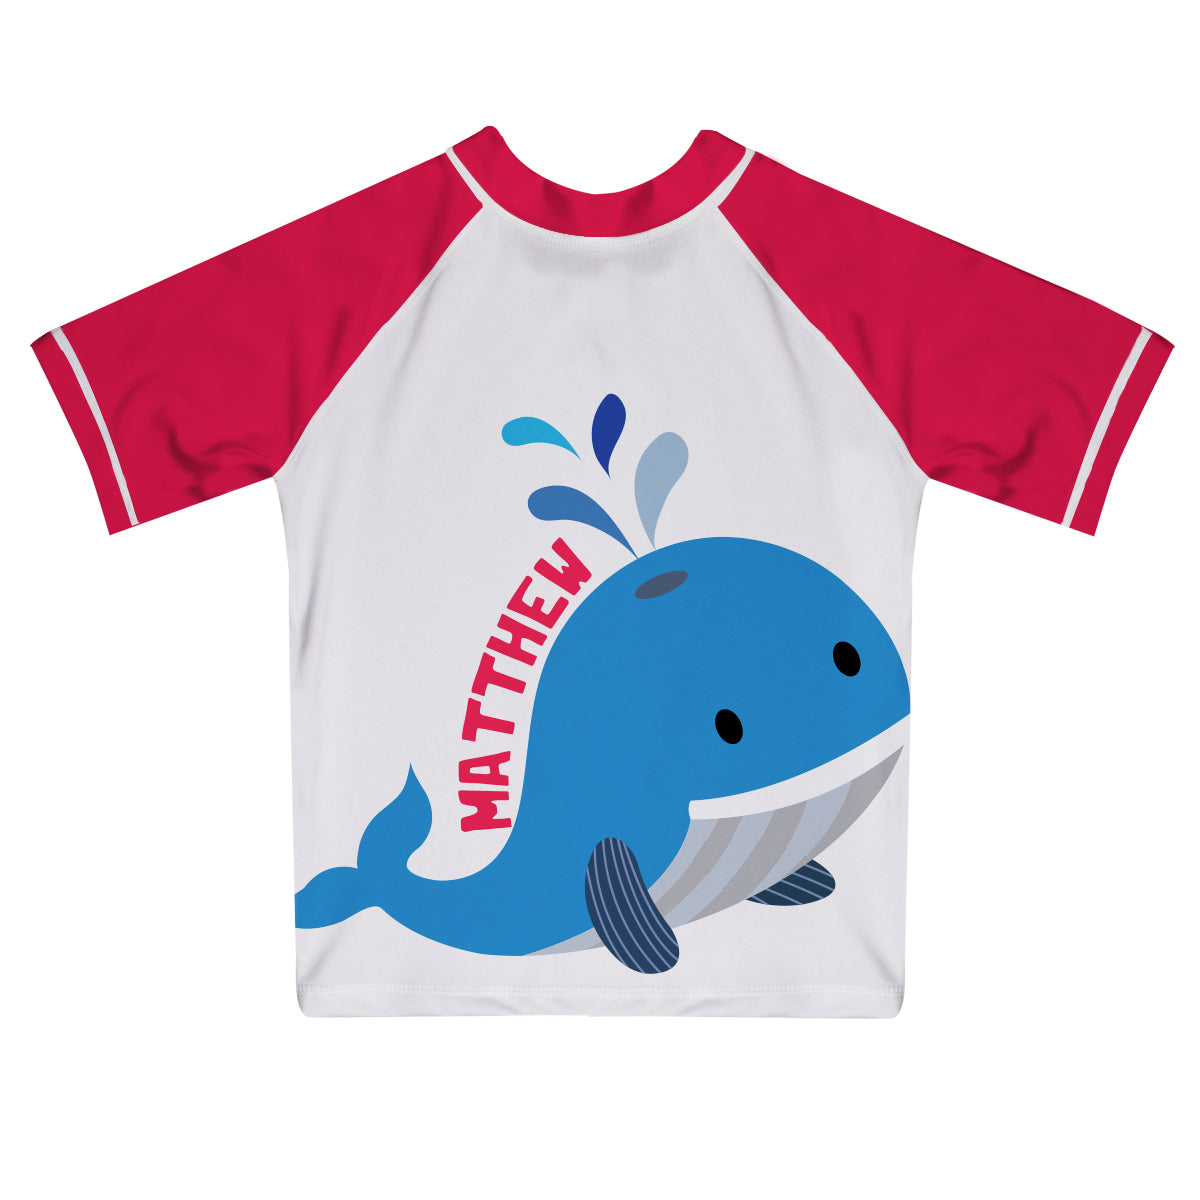 Whale Name White and Red Short Sleeve Rash Guard - Wimziy&Co.